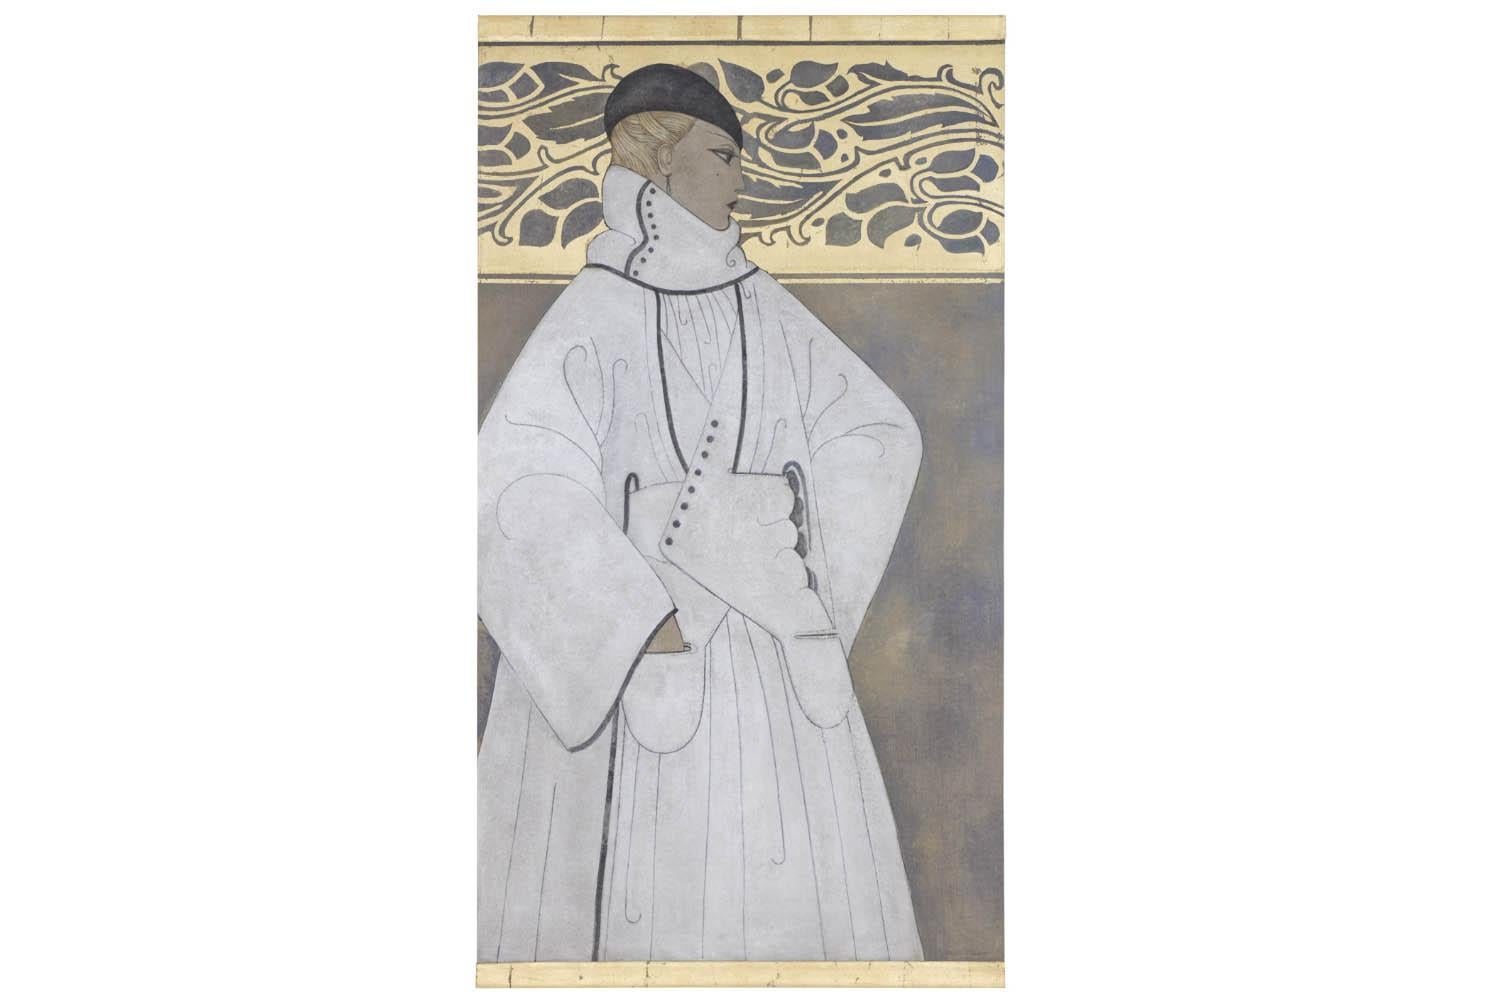 Painted canvas figuring a side view Art Deco woman. She wears a large white coat with black pipings and buttons. She has blond hair and wears a black hat on her head.
Blue and brown background with a top gilt frieze with foliage scrolls